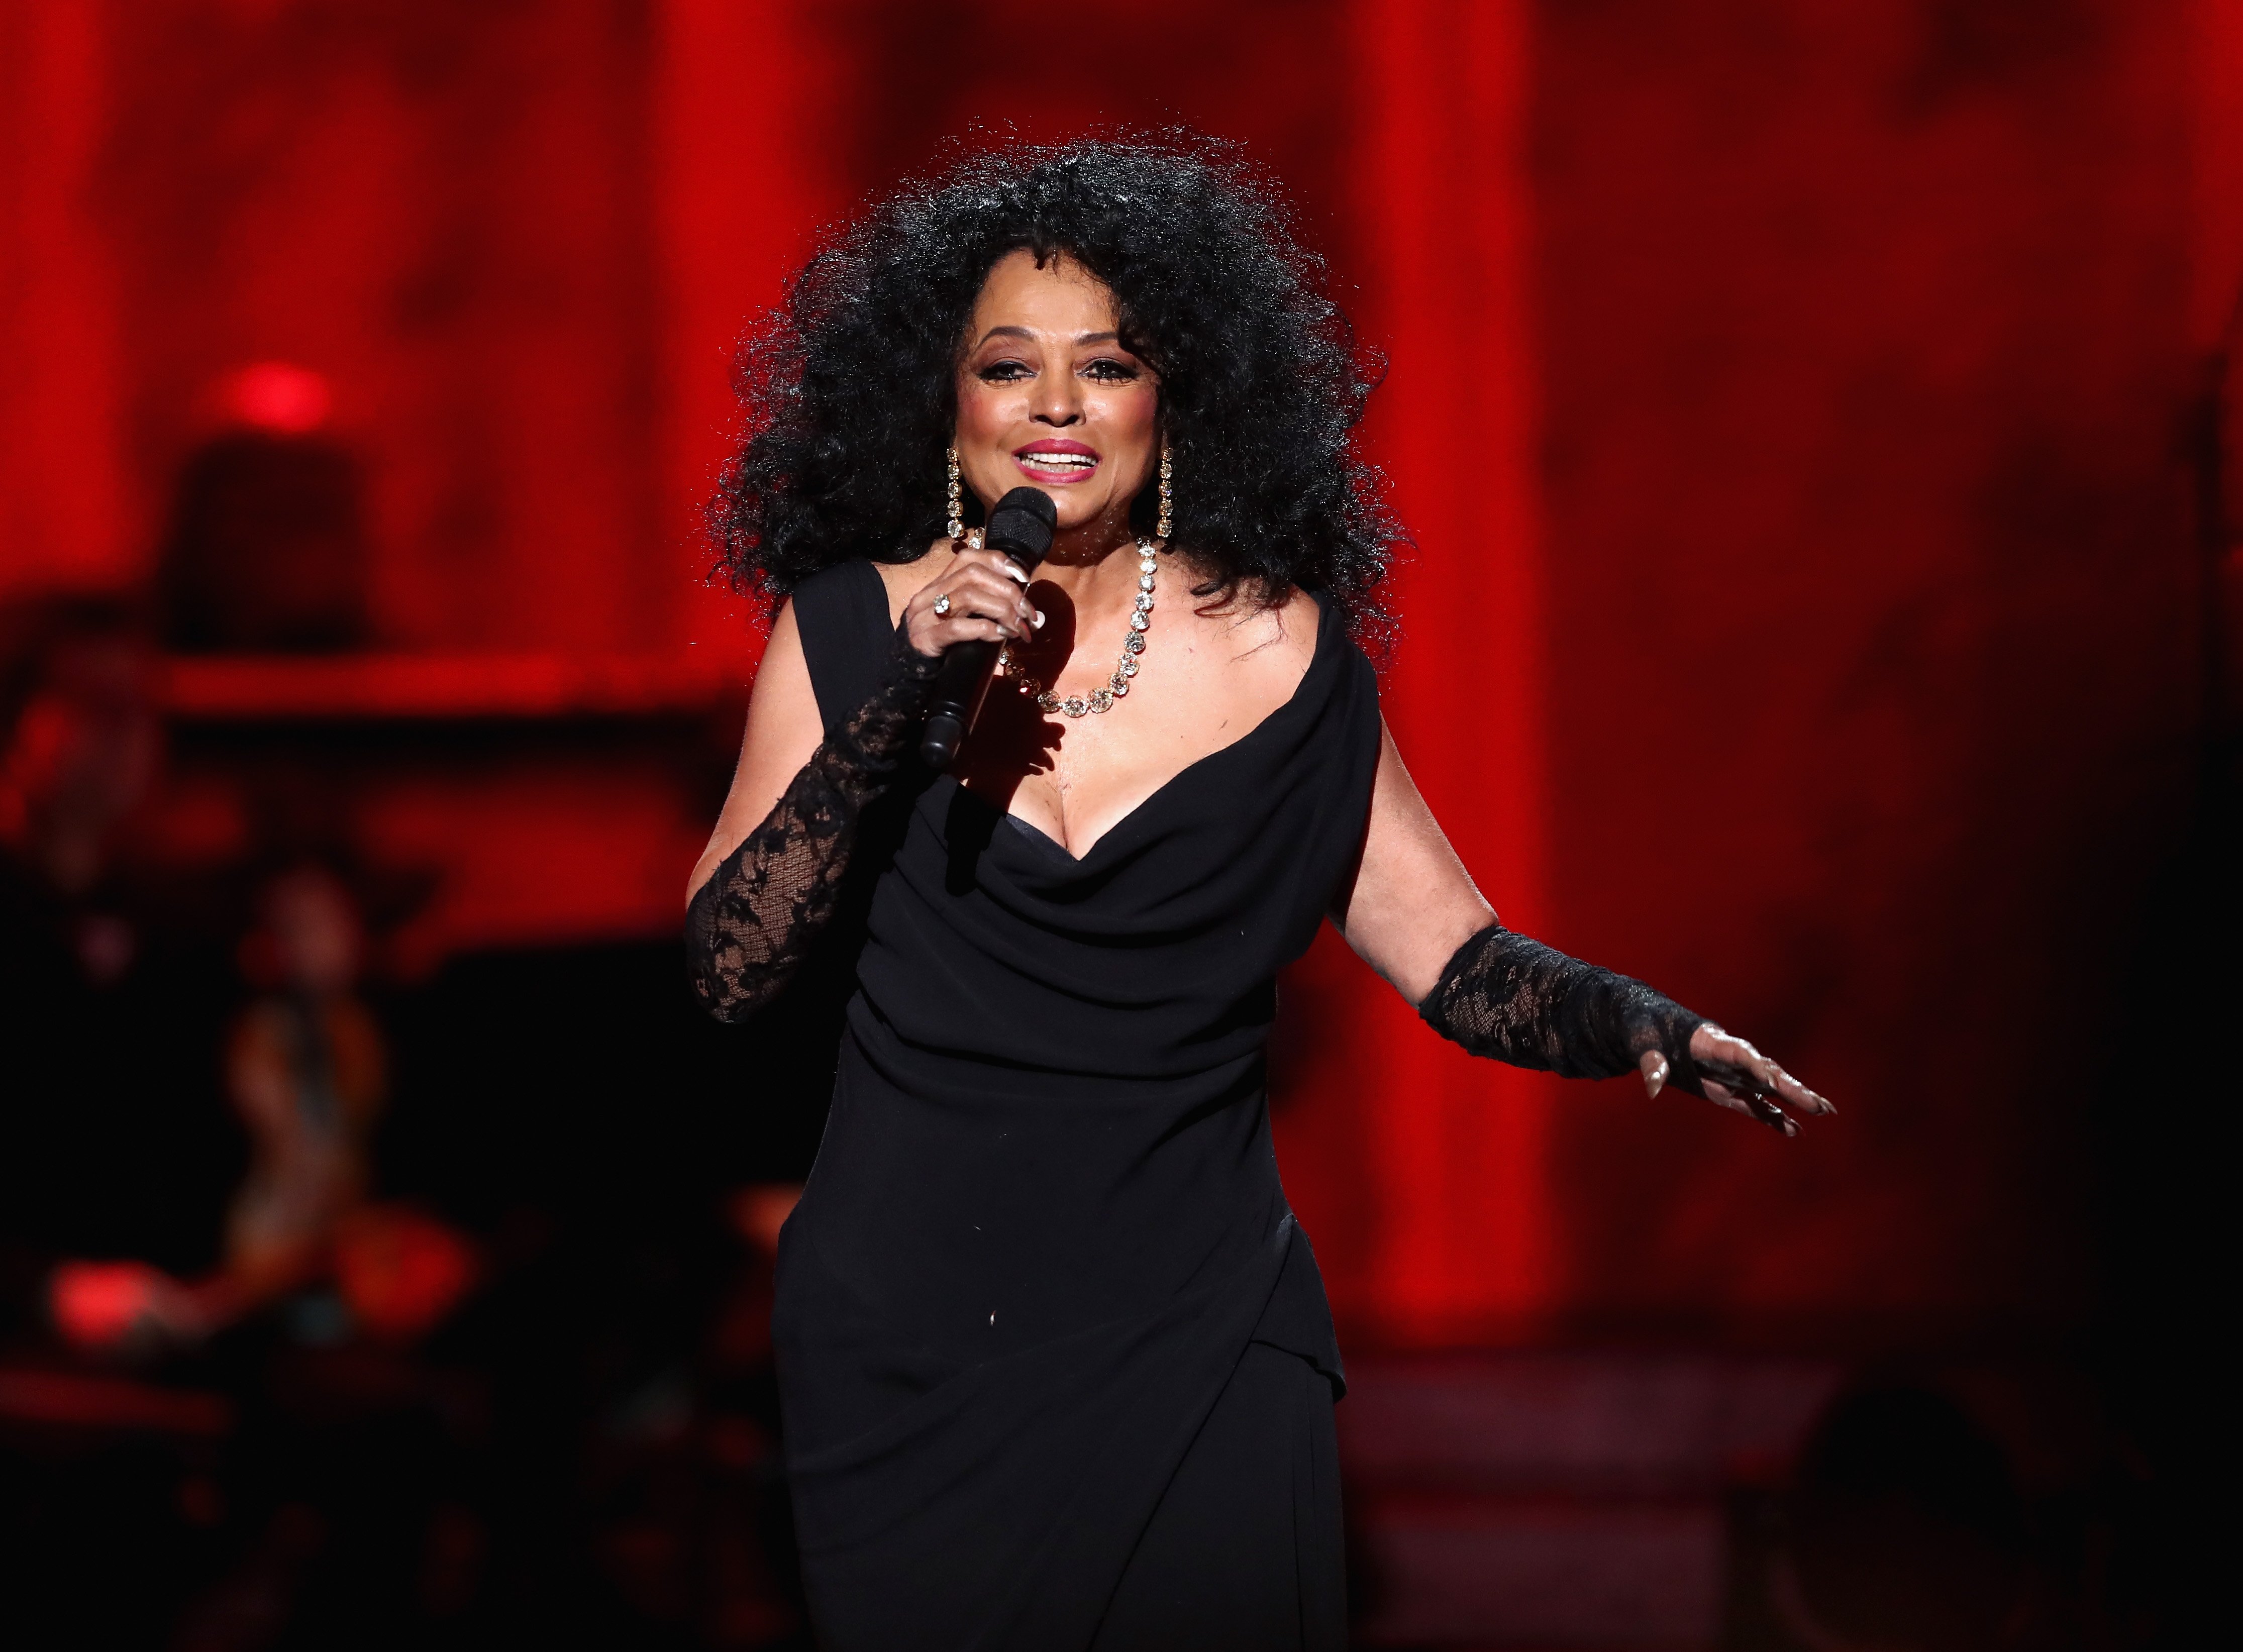 Diana Ross performs onstage during Motown 60: A GRAMMY Celebration at Microsoft Theater on February 12, 2019. | Photo: Getty Images.